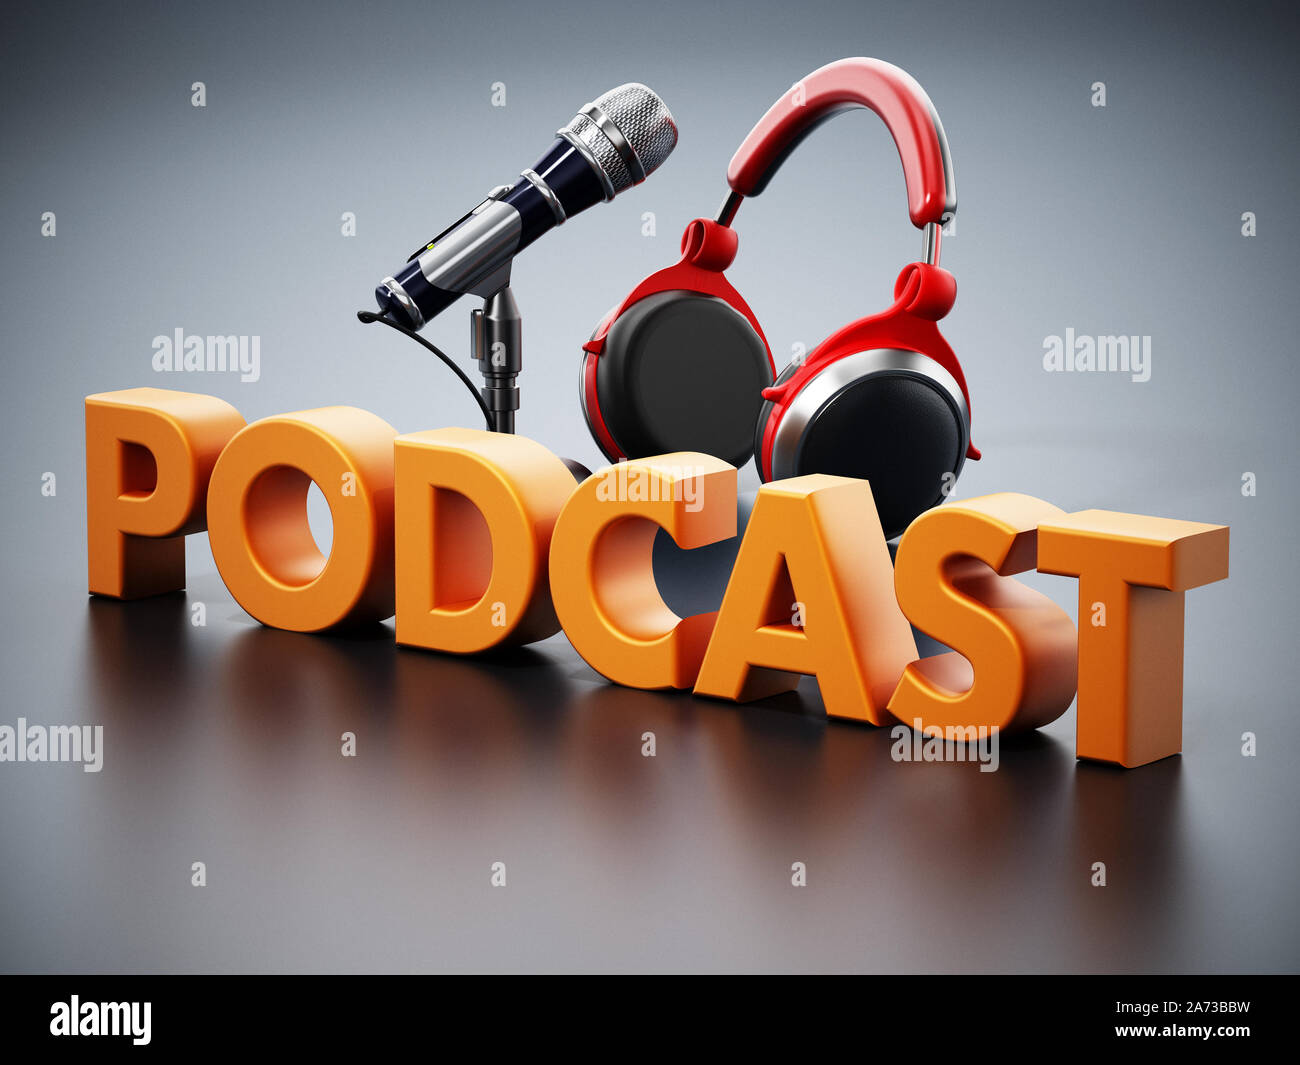 Podcast word, microphone and headphones standing on black surface. 3D illustration. Stock Photo